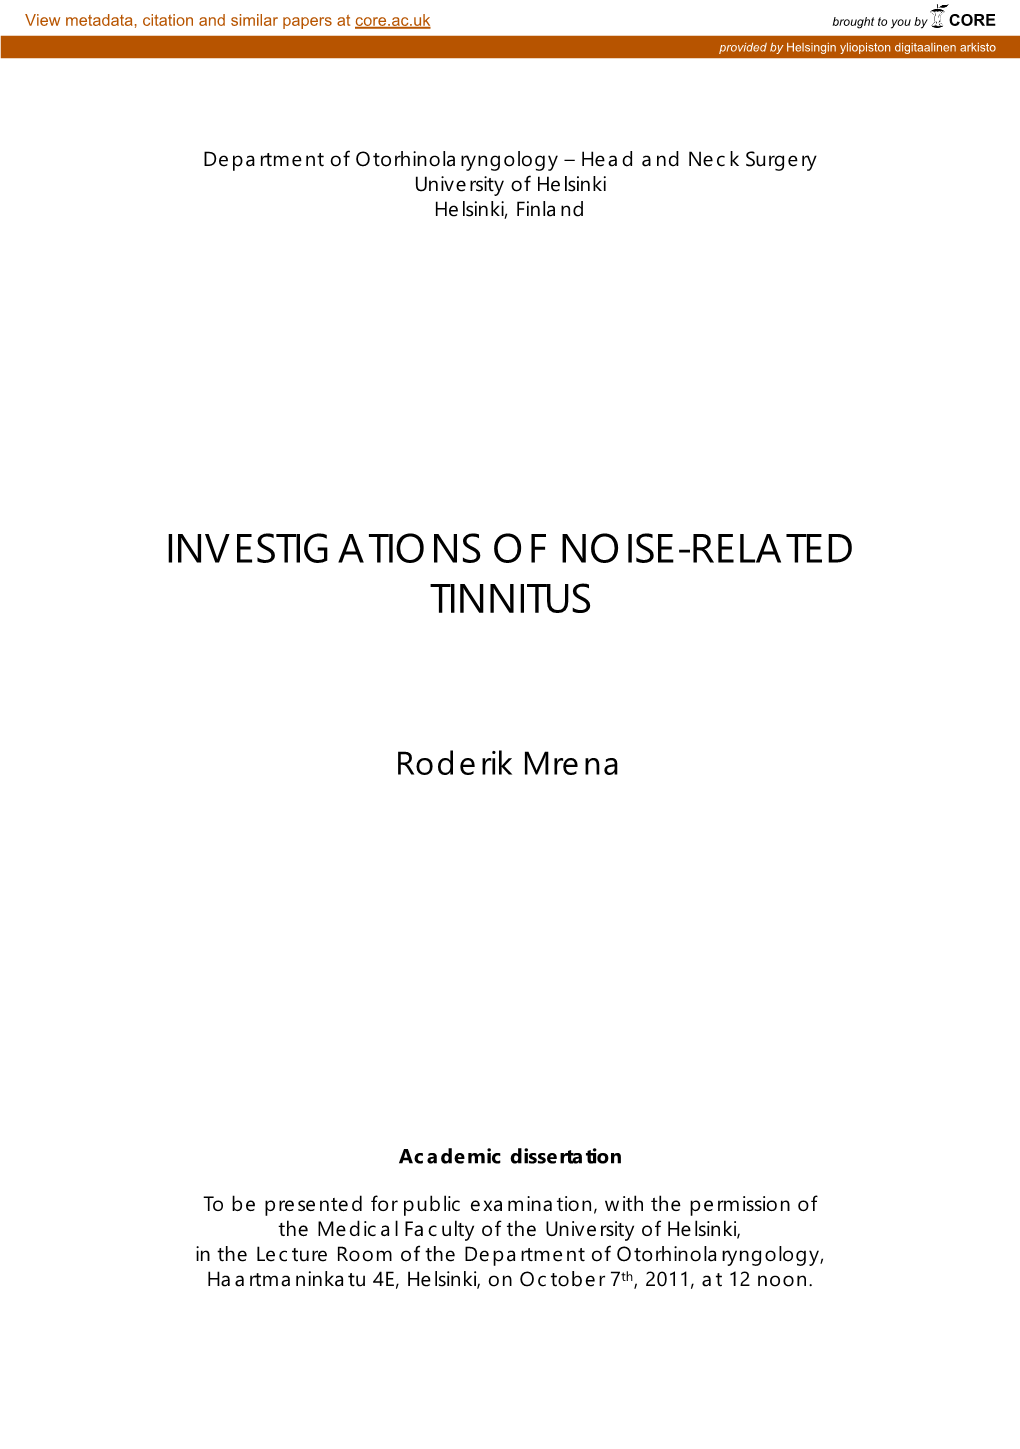 Investigations of Noise-Related Tinnitus